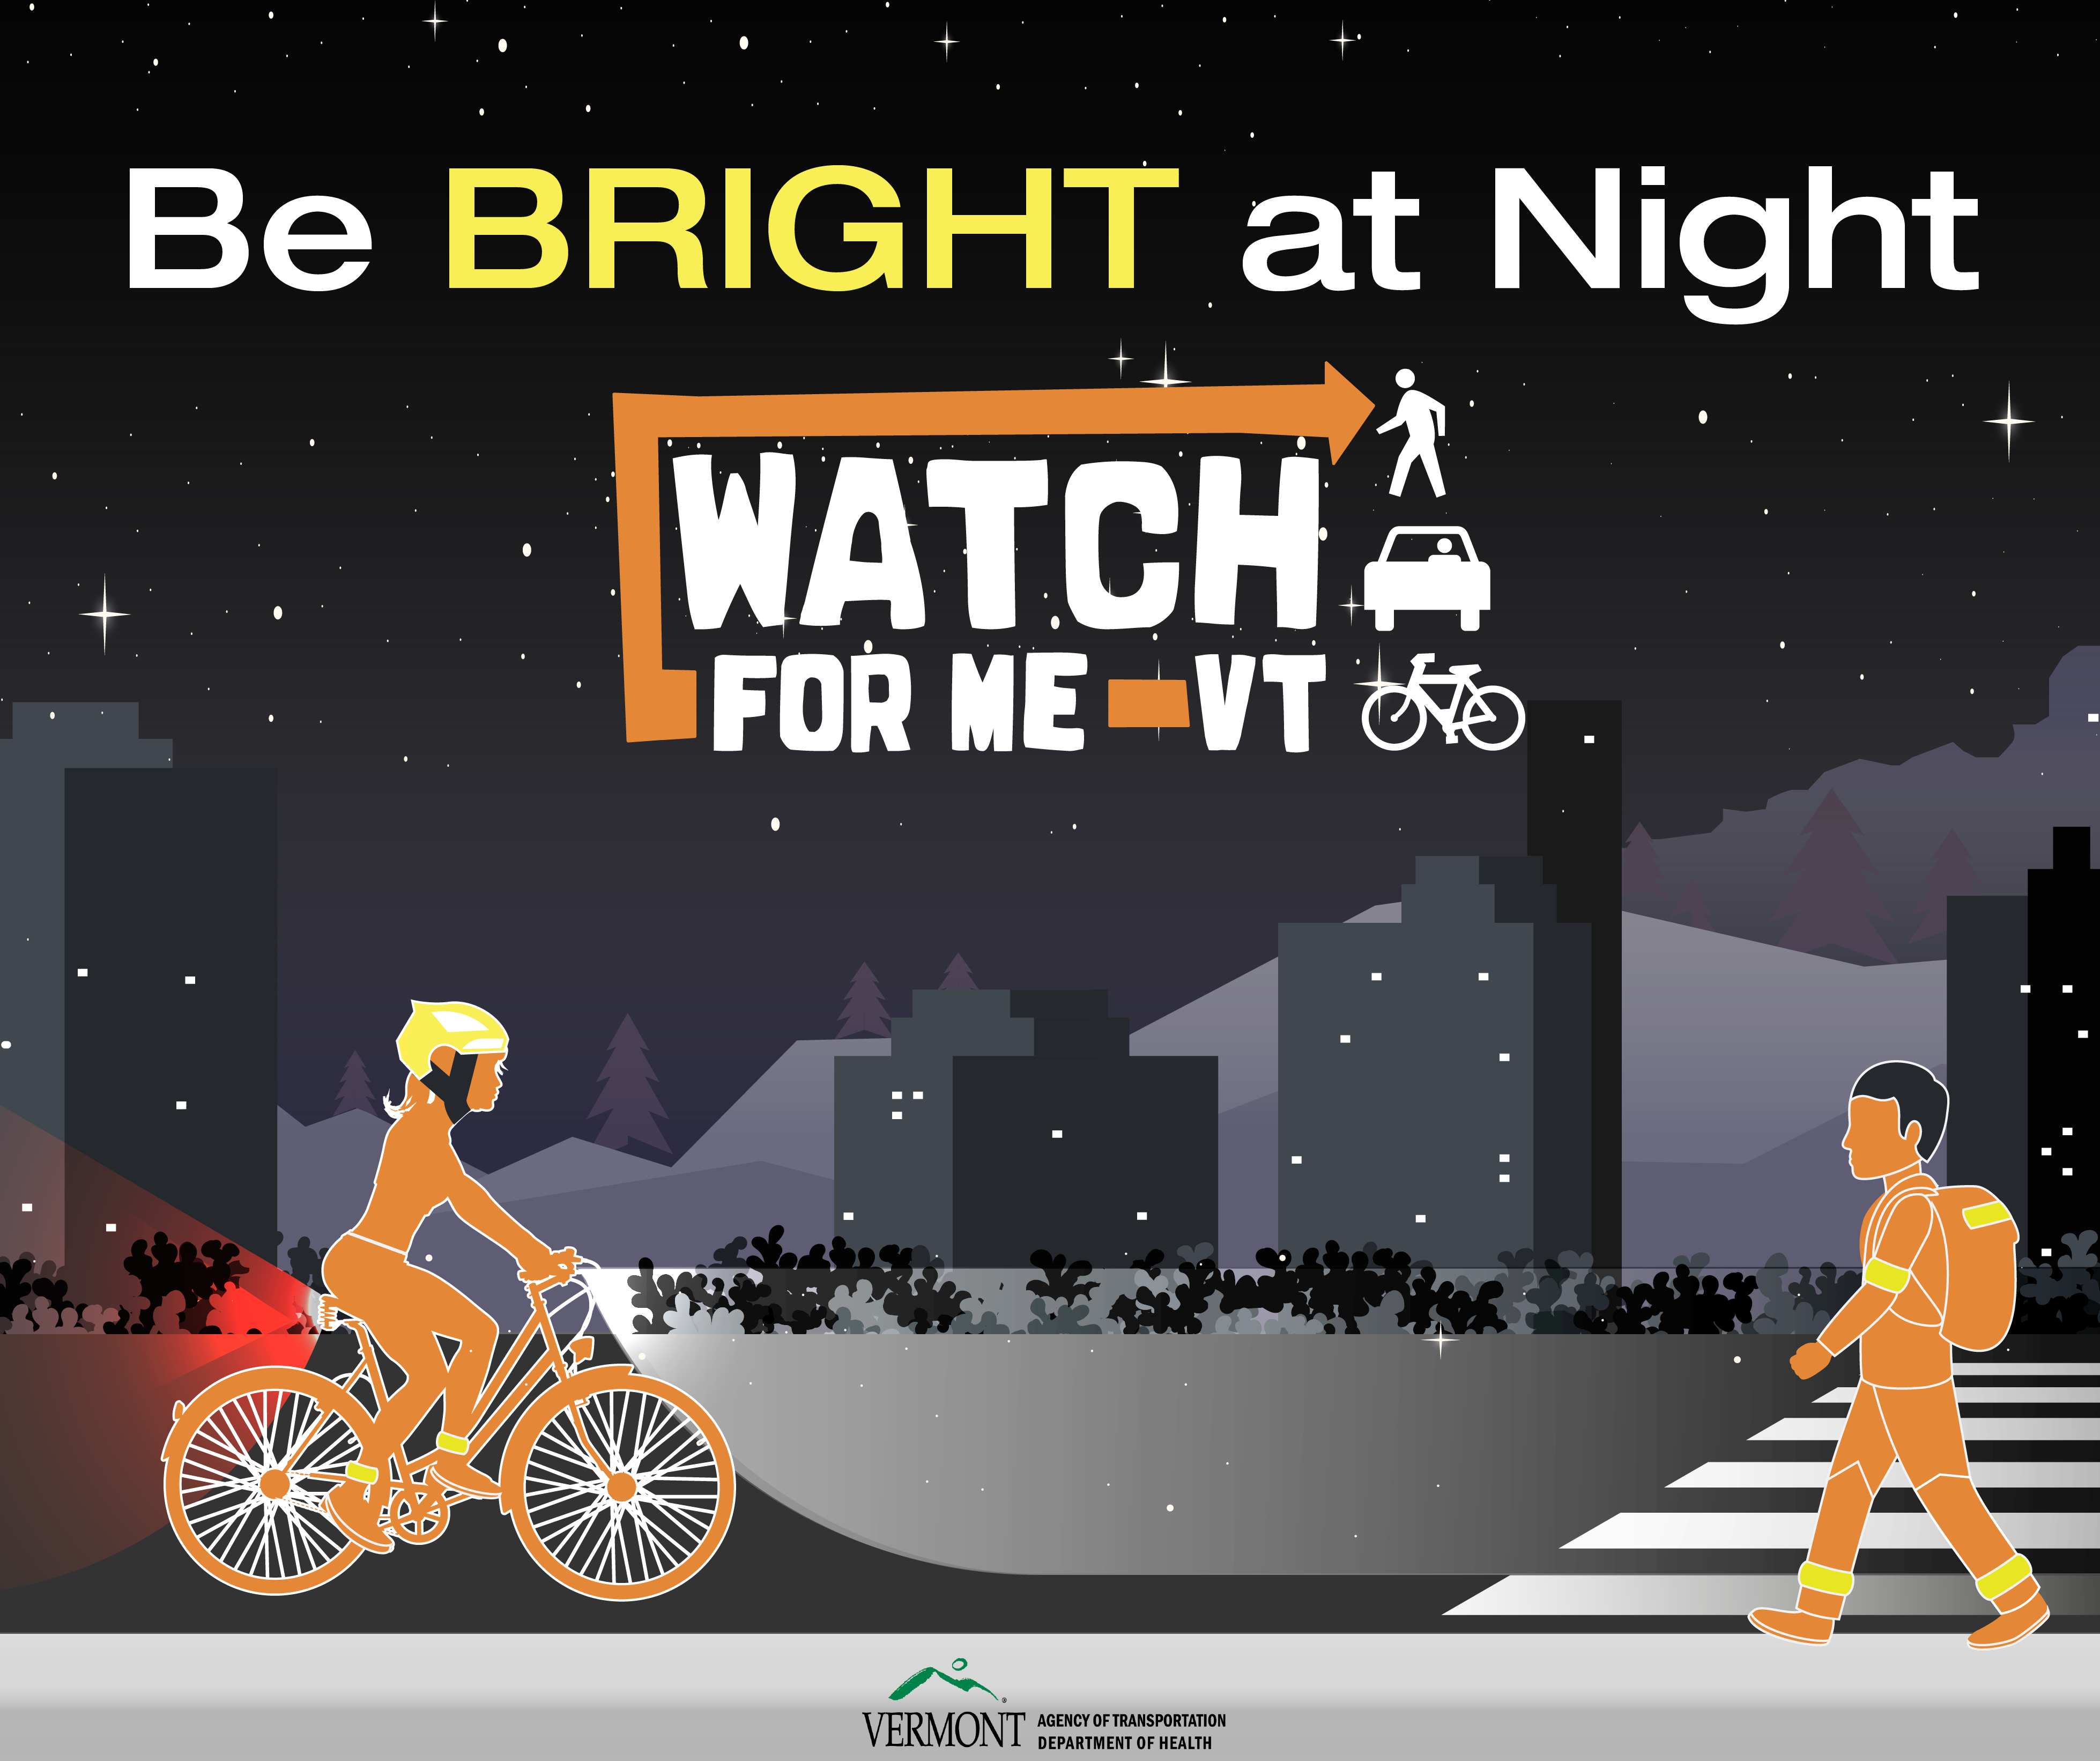 http://safestreets.vermont.gov/sites/safestreets/files/inline-images/Be%20bright%20at%20night%20cyclist-01-01.png